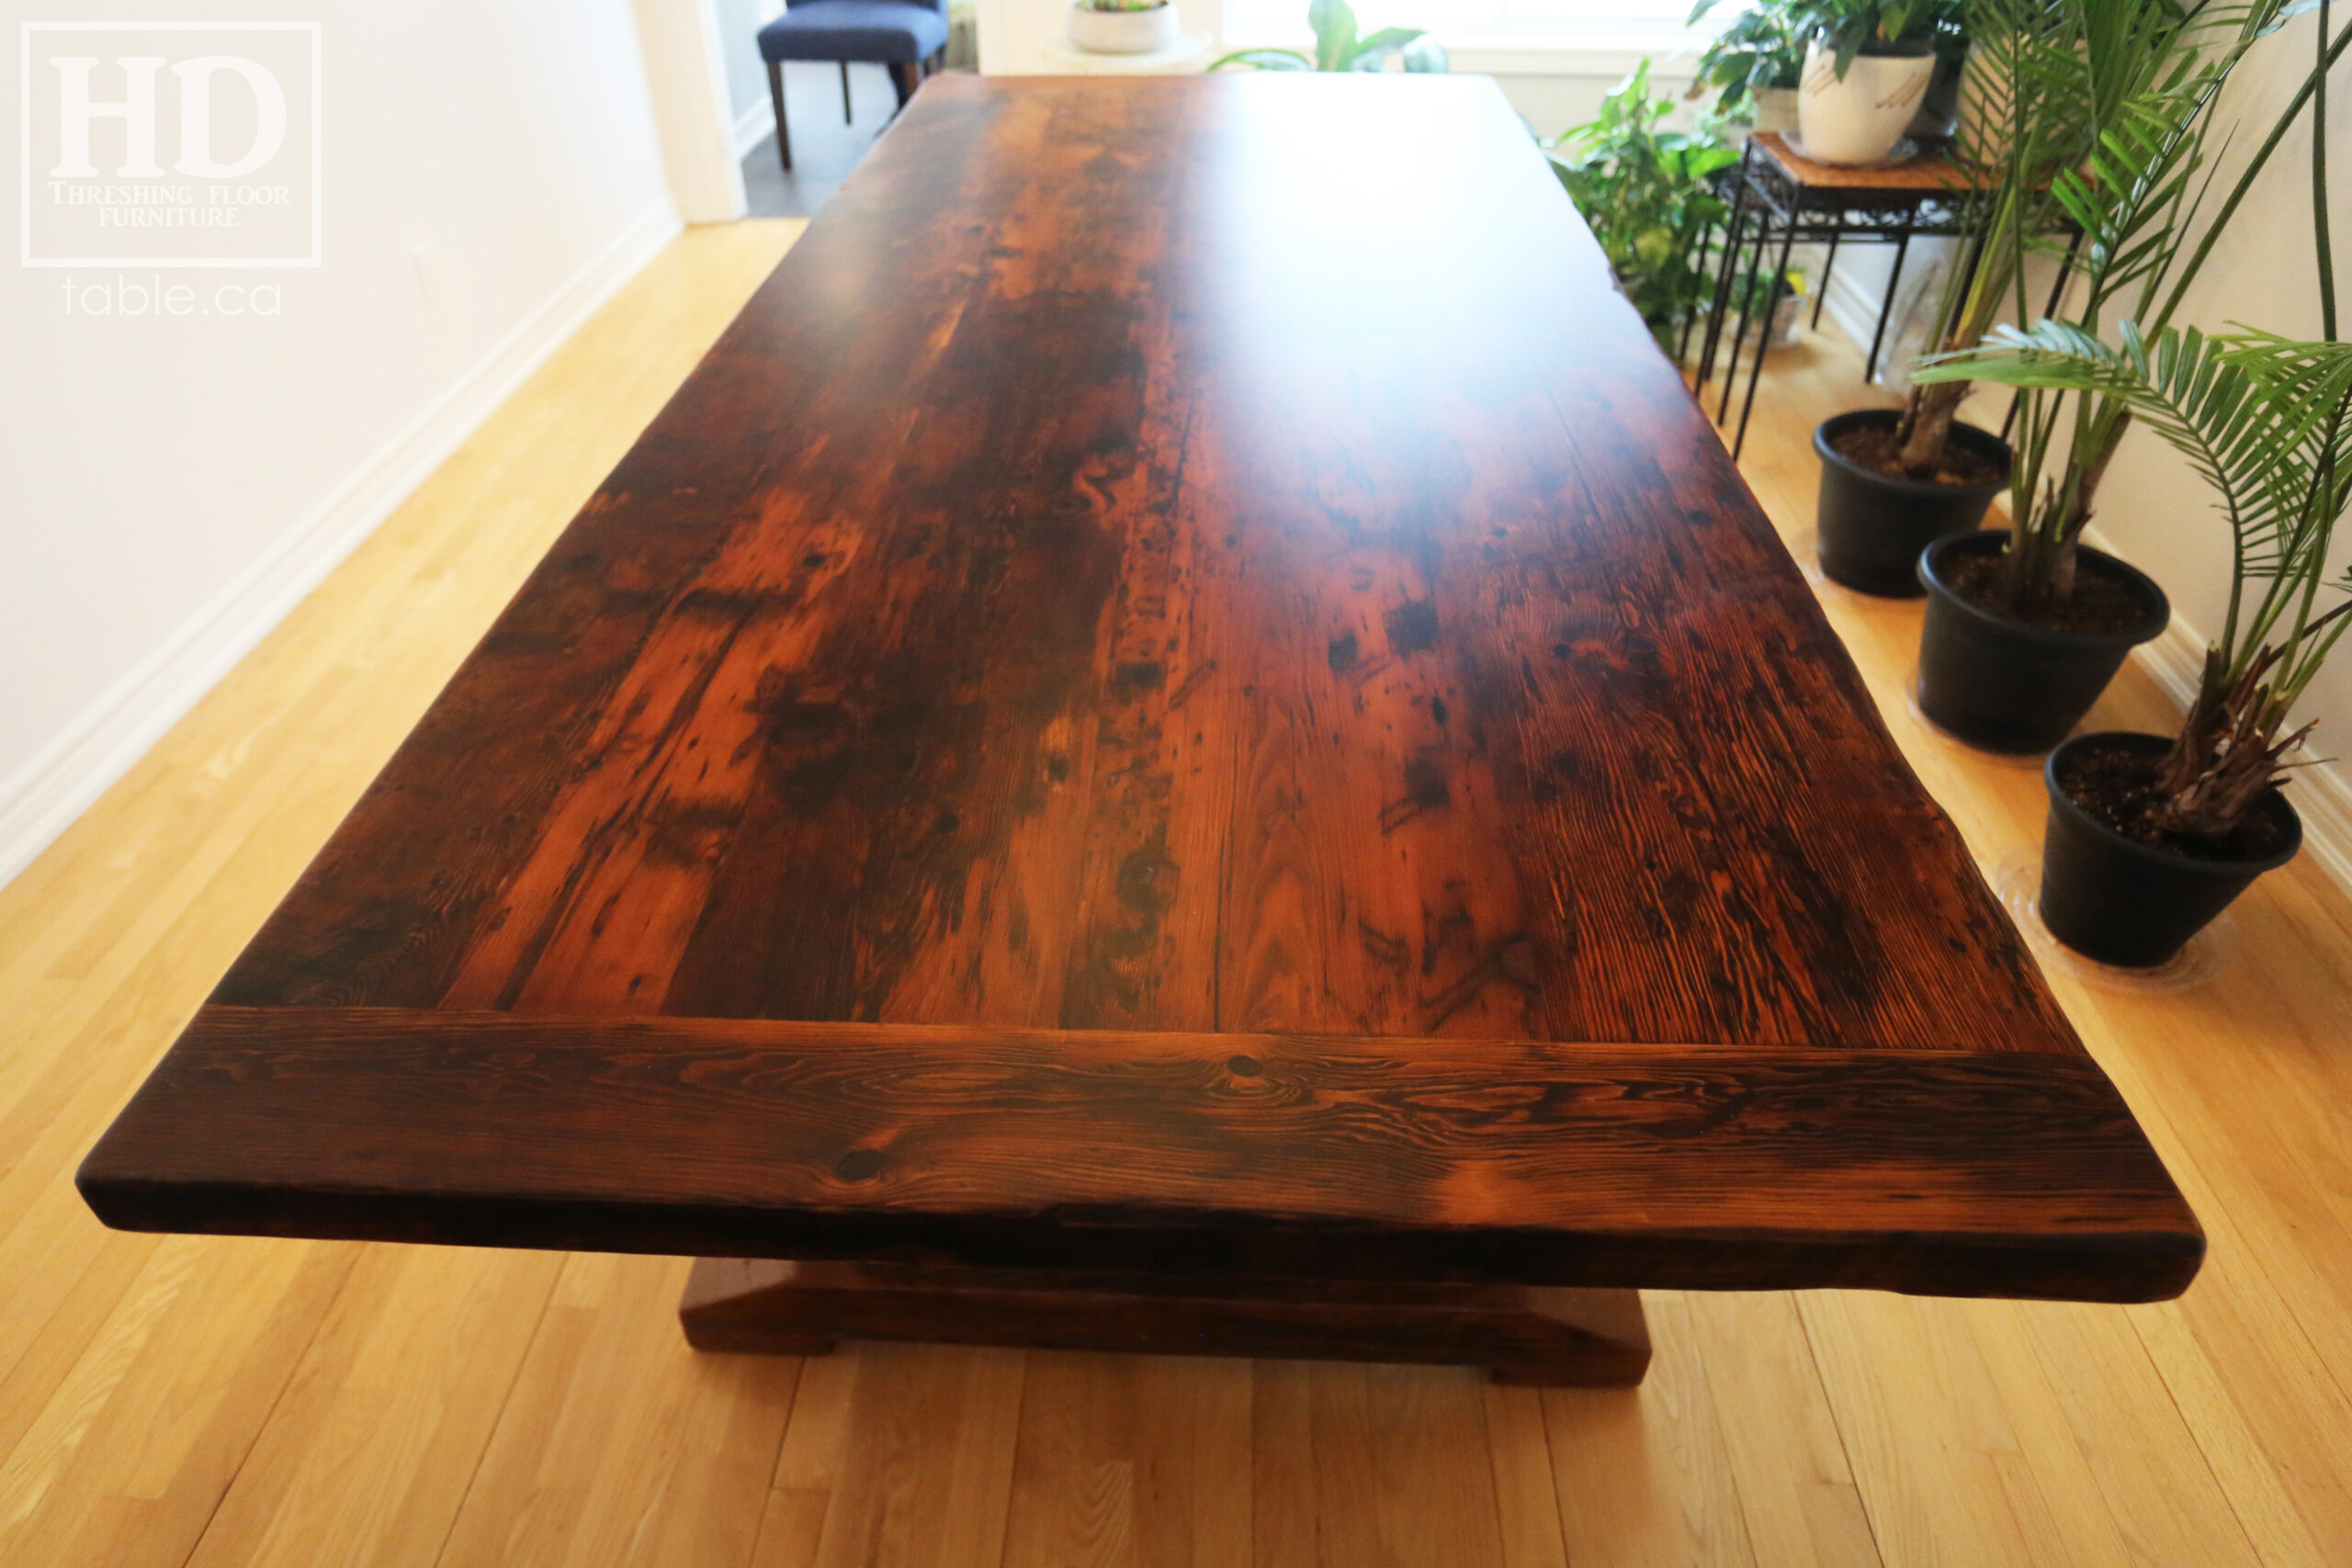 8.5' Ontario Barnwood Boardroom Table we made for a Barrie Company - 42" wide - Sawbuck Base - Old Growth Hemlock Threshing Floor Construction - Original edges & distressing maintained - Premium epoxy + matte polyurethane finish  - www.table.ca